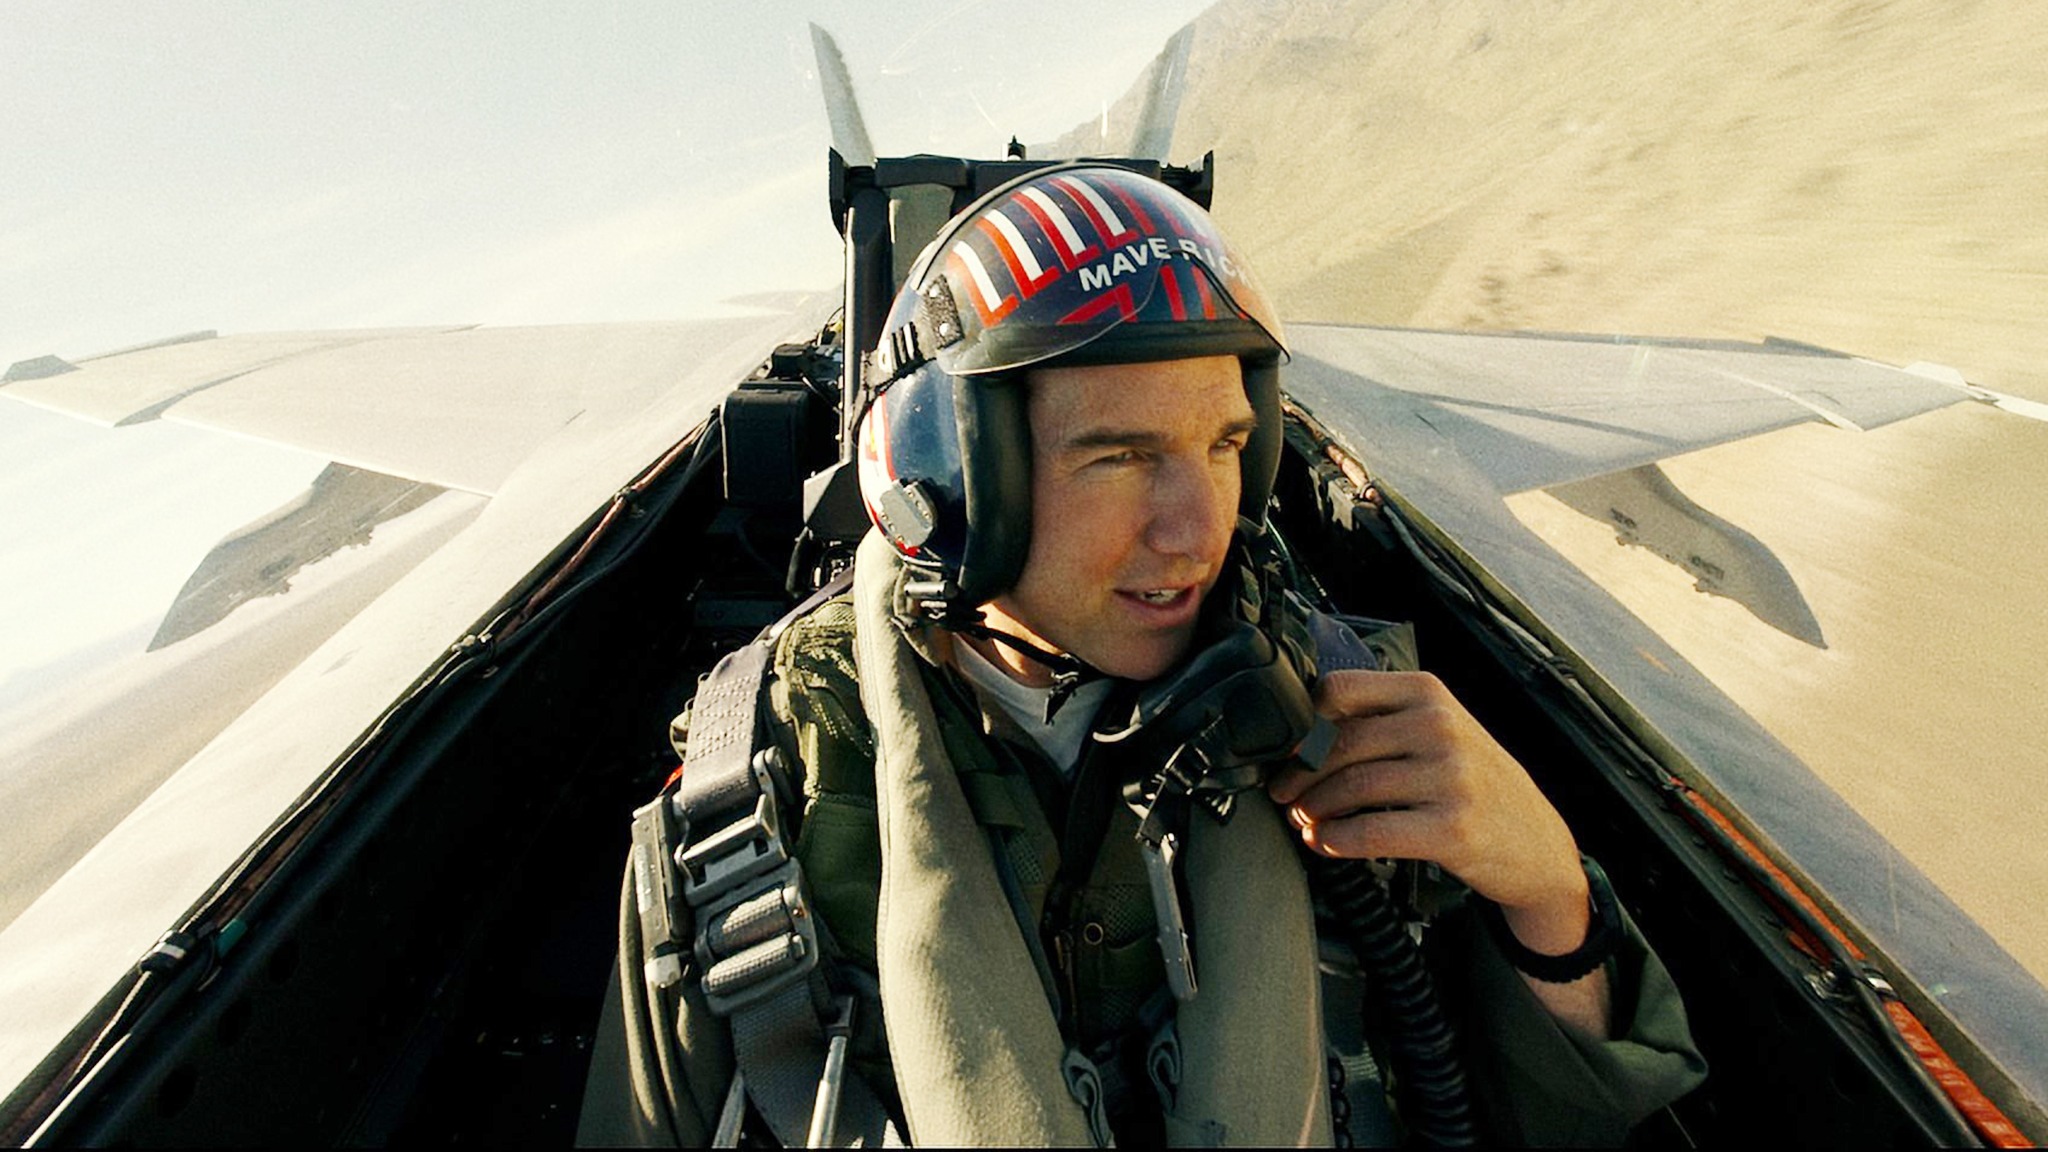 Still Top Gun? What Tom Cruise's new movie tells us about American power